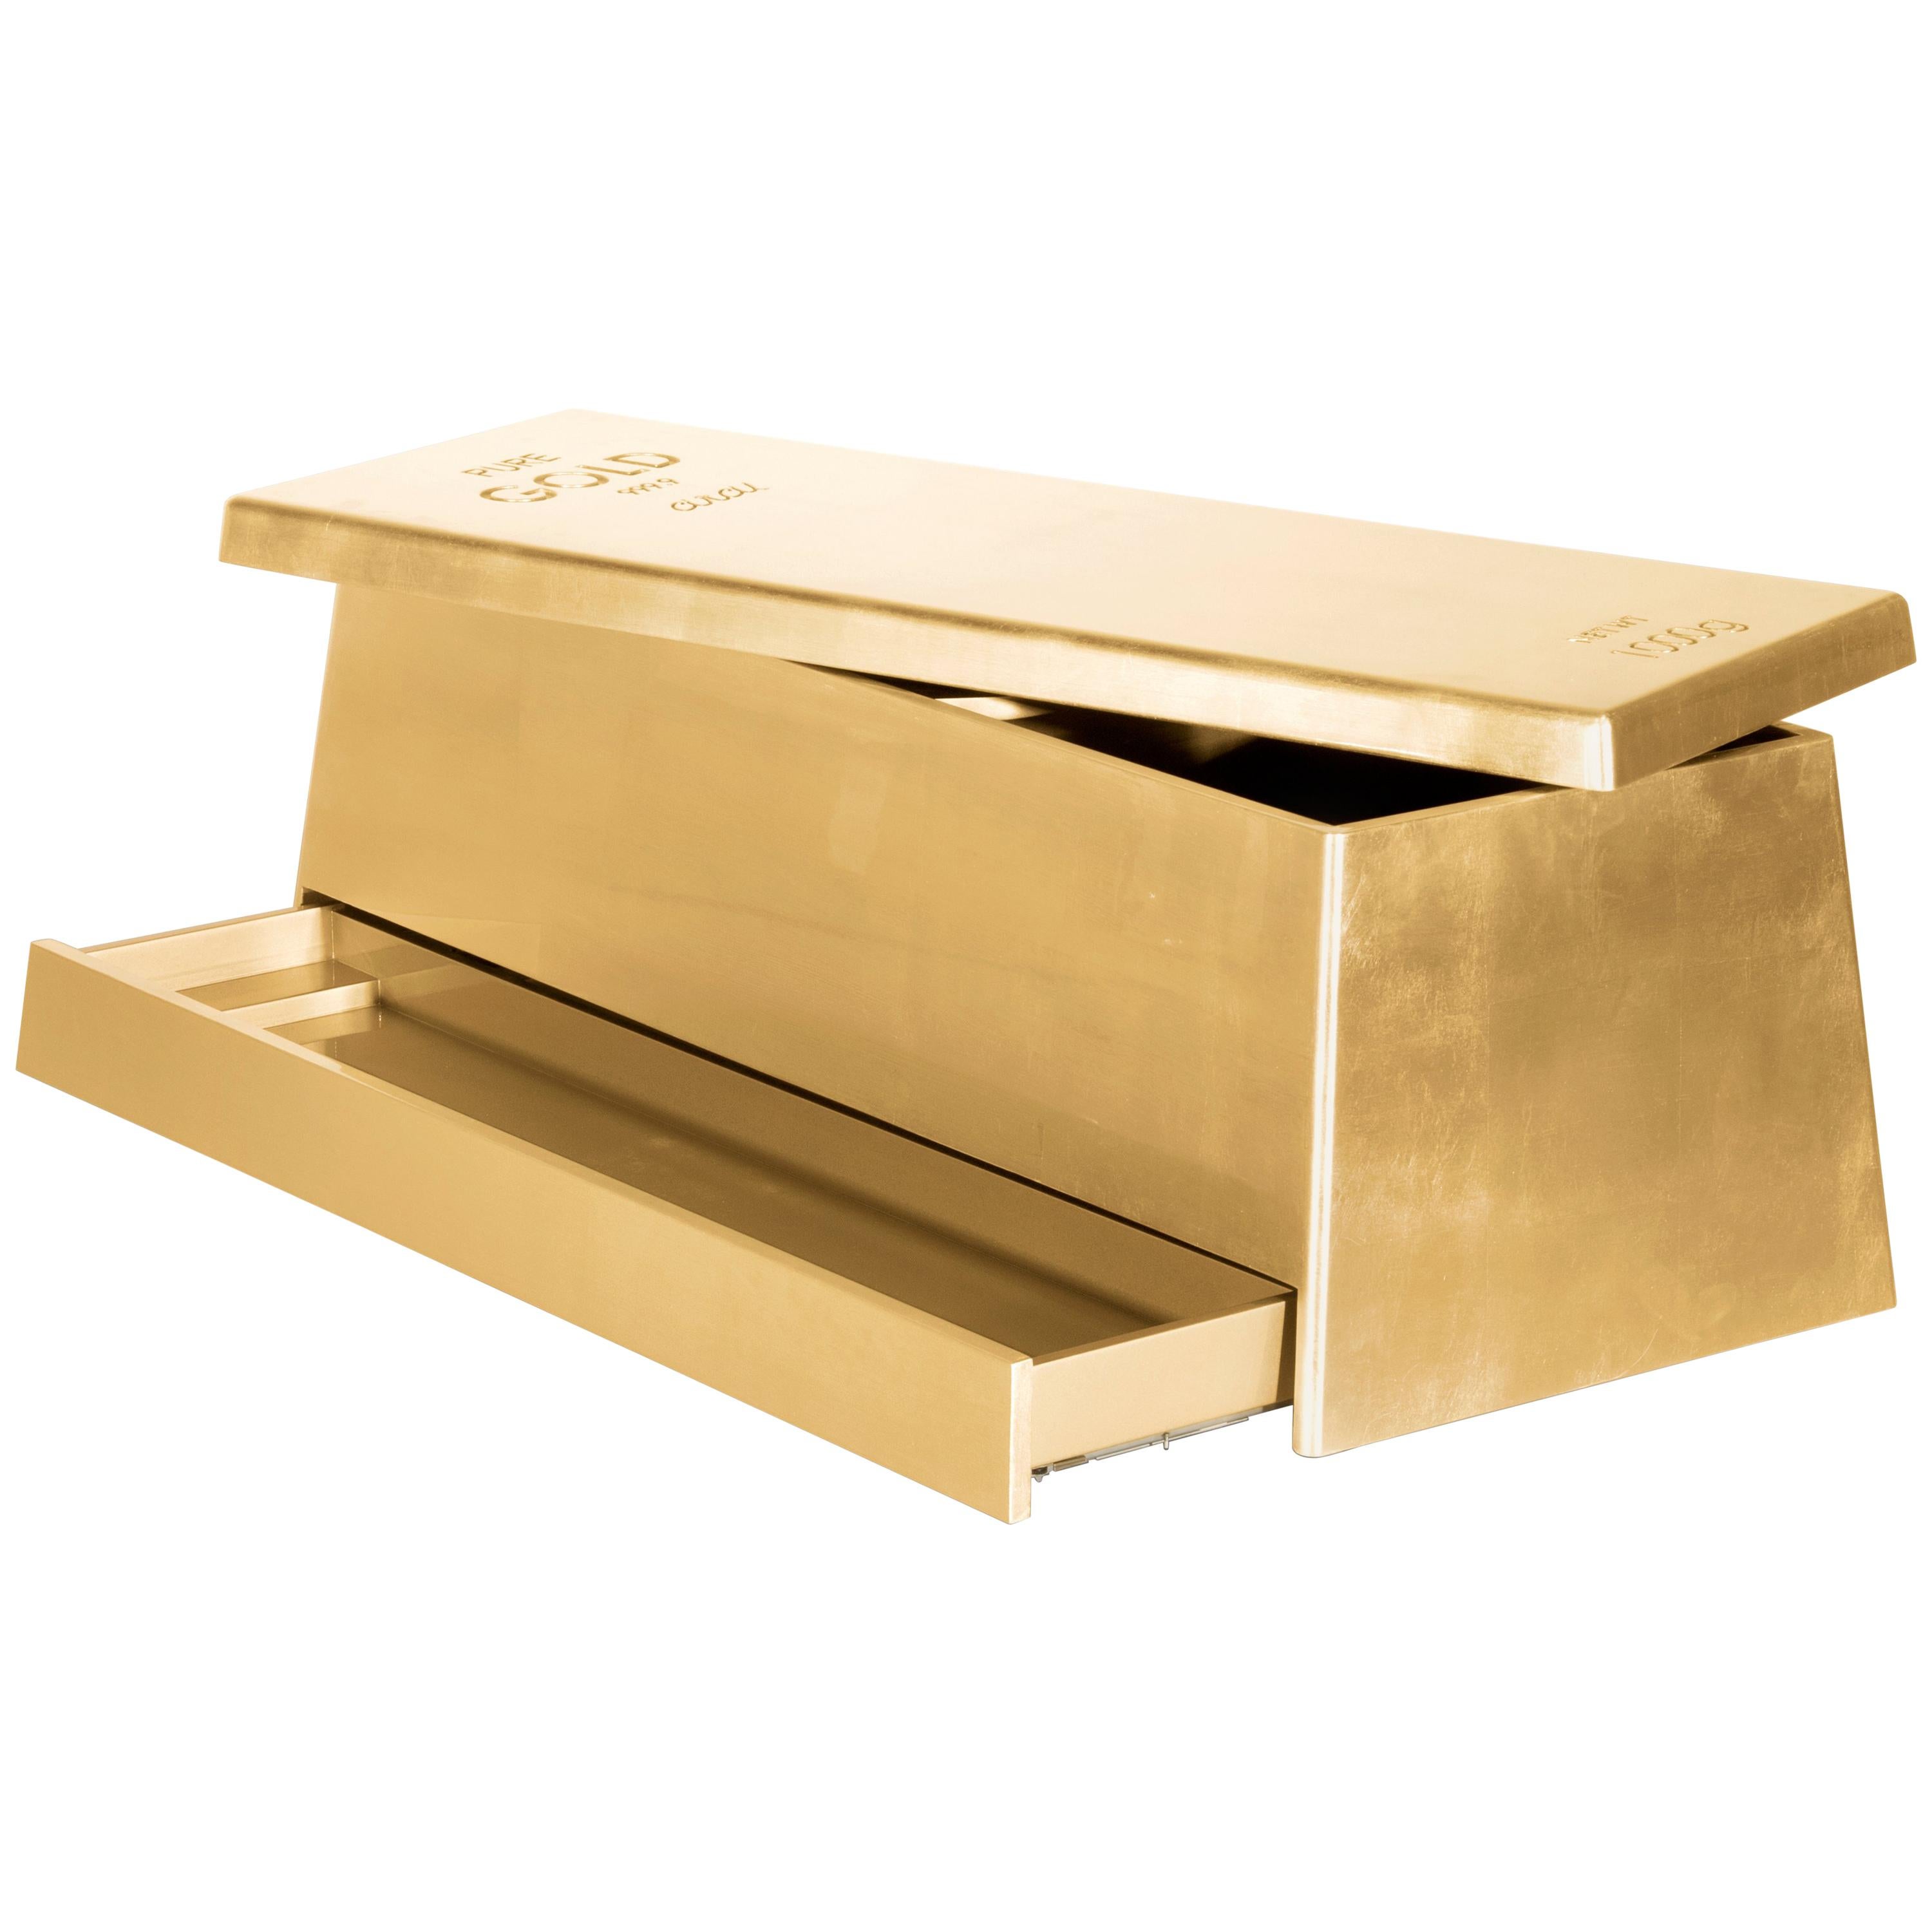 Gold Kids Toy Box in Wood with Gold Finish by Circu Magical Furniture

Gold Kids Toy Box in Wood with Gold Finish by Circu Magical Furniture is a kids’ toy box inspired by the fine gold bar shape. This toy box is a useful storage solution for kids’